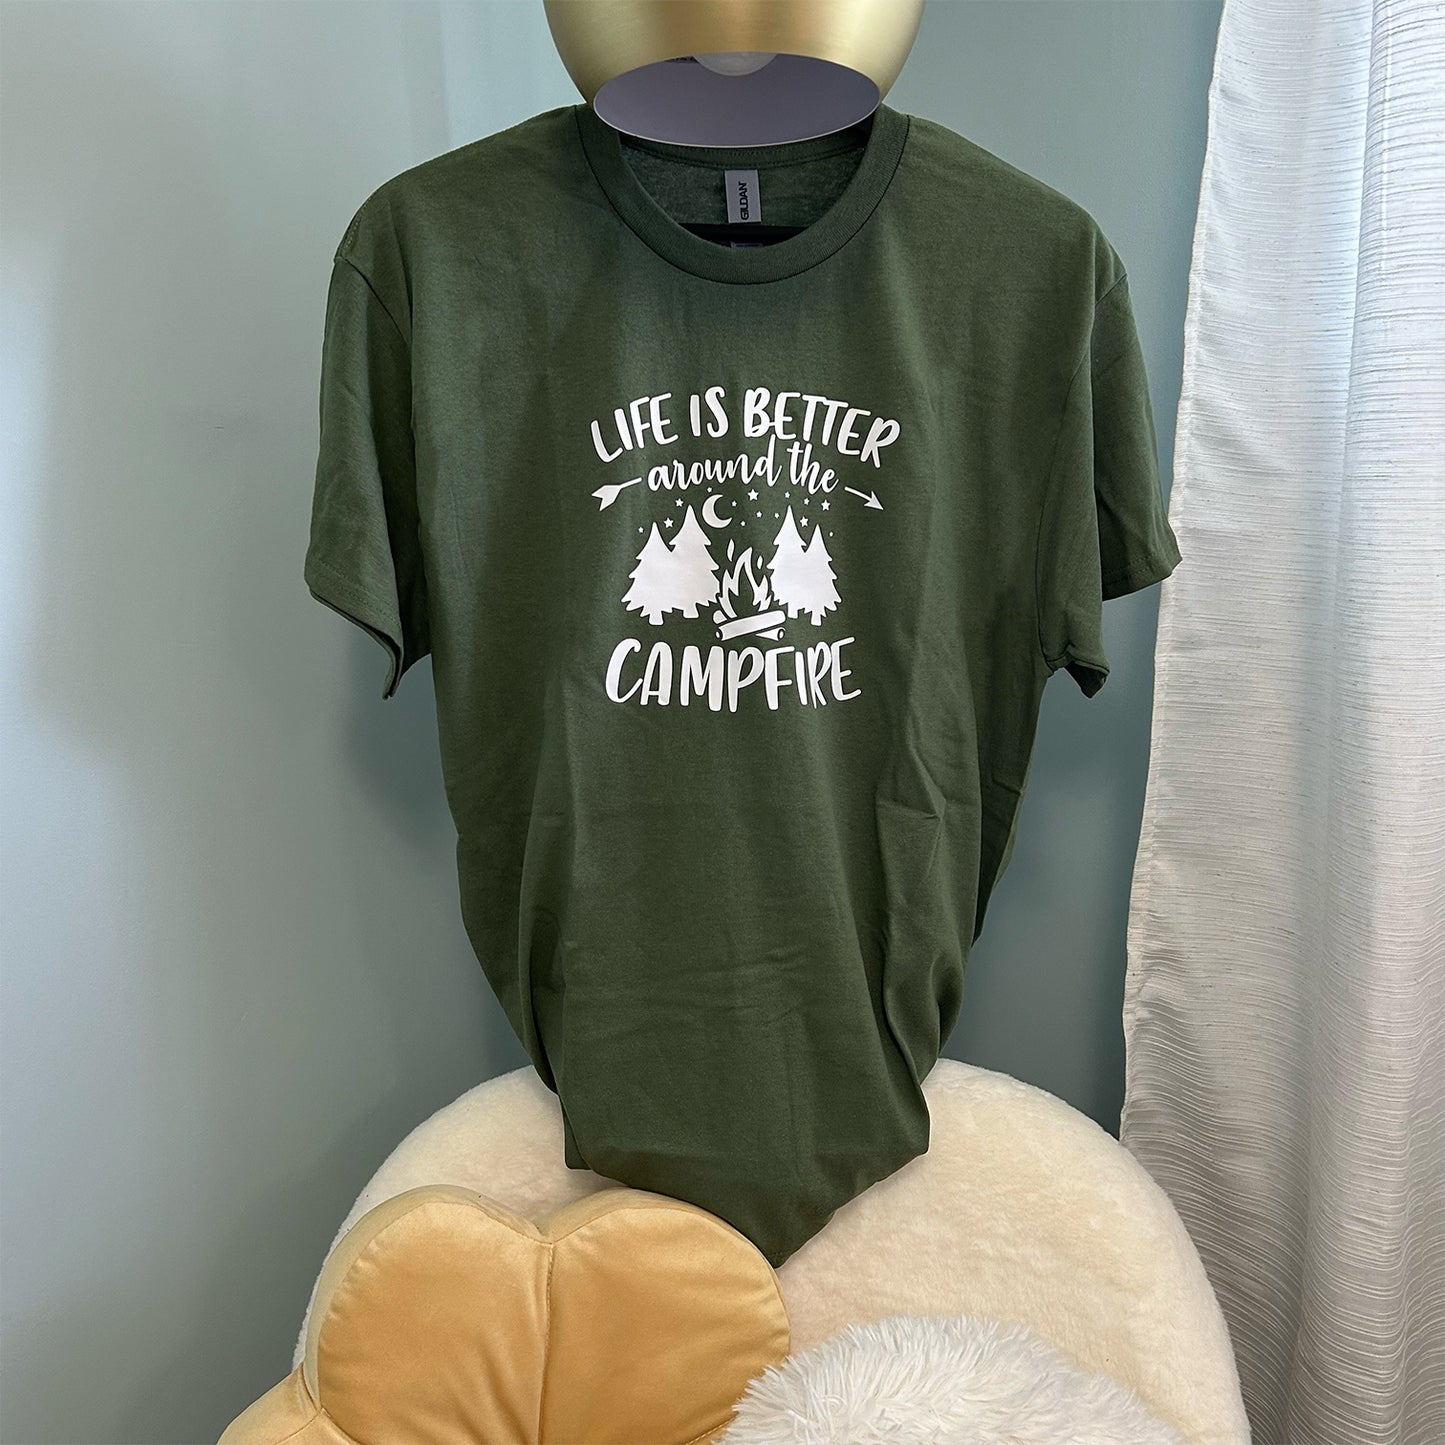 Life Is Better Around The Campfire ✩ T-Shirt